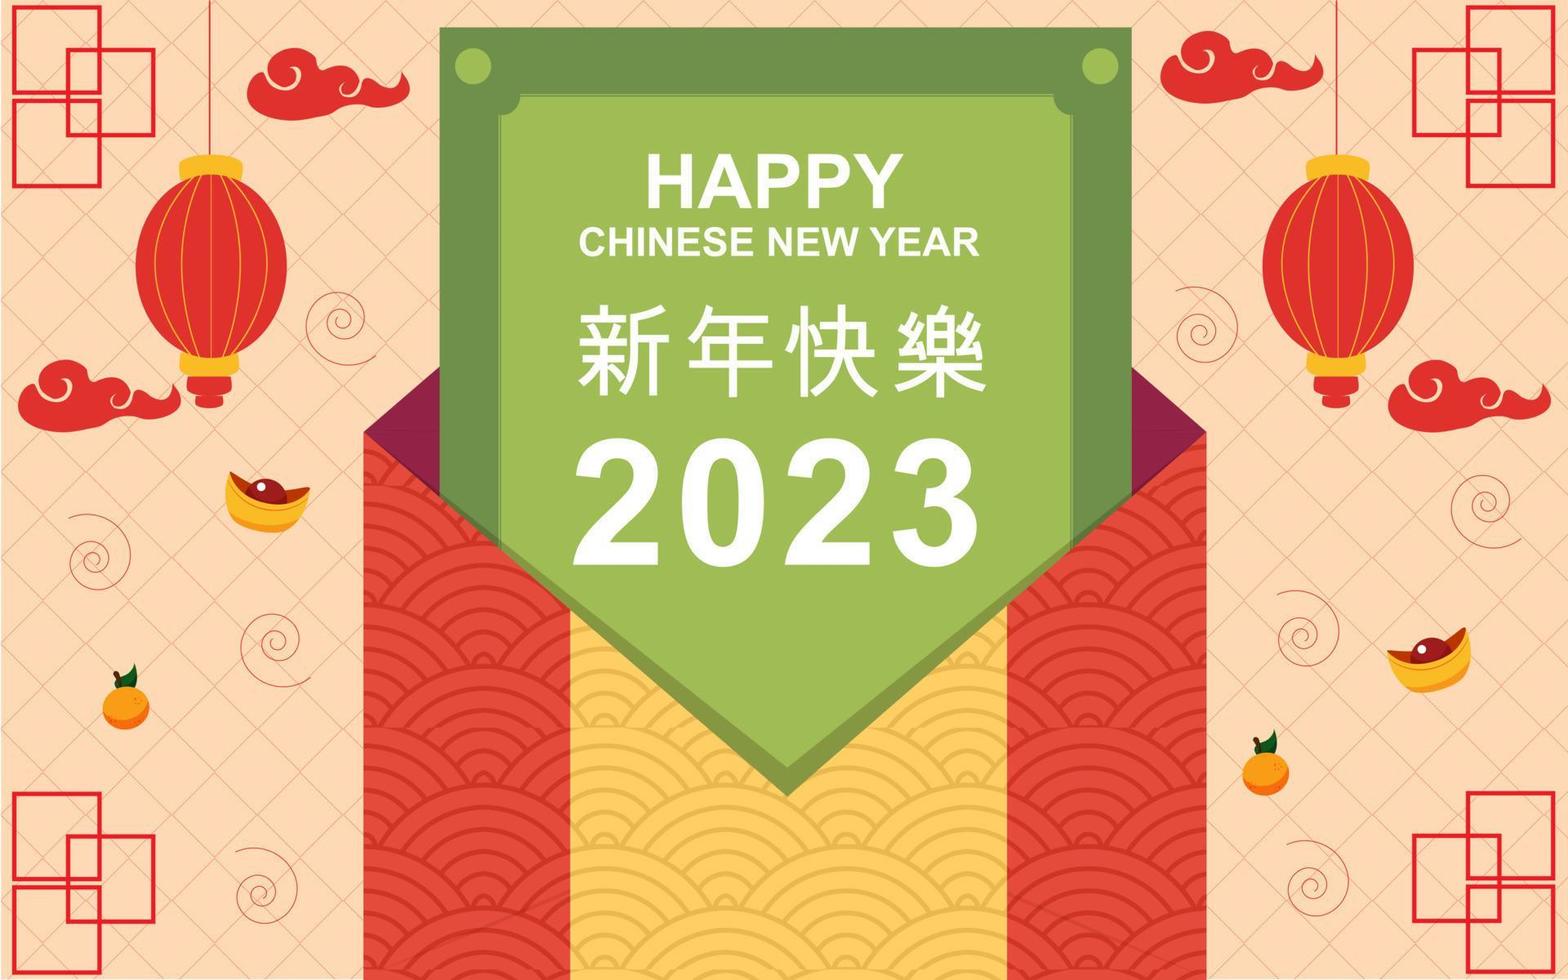 Chinese New Year 2023 Year vector illustration. Happy Chinese New Year 2023